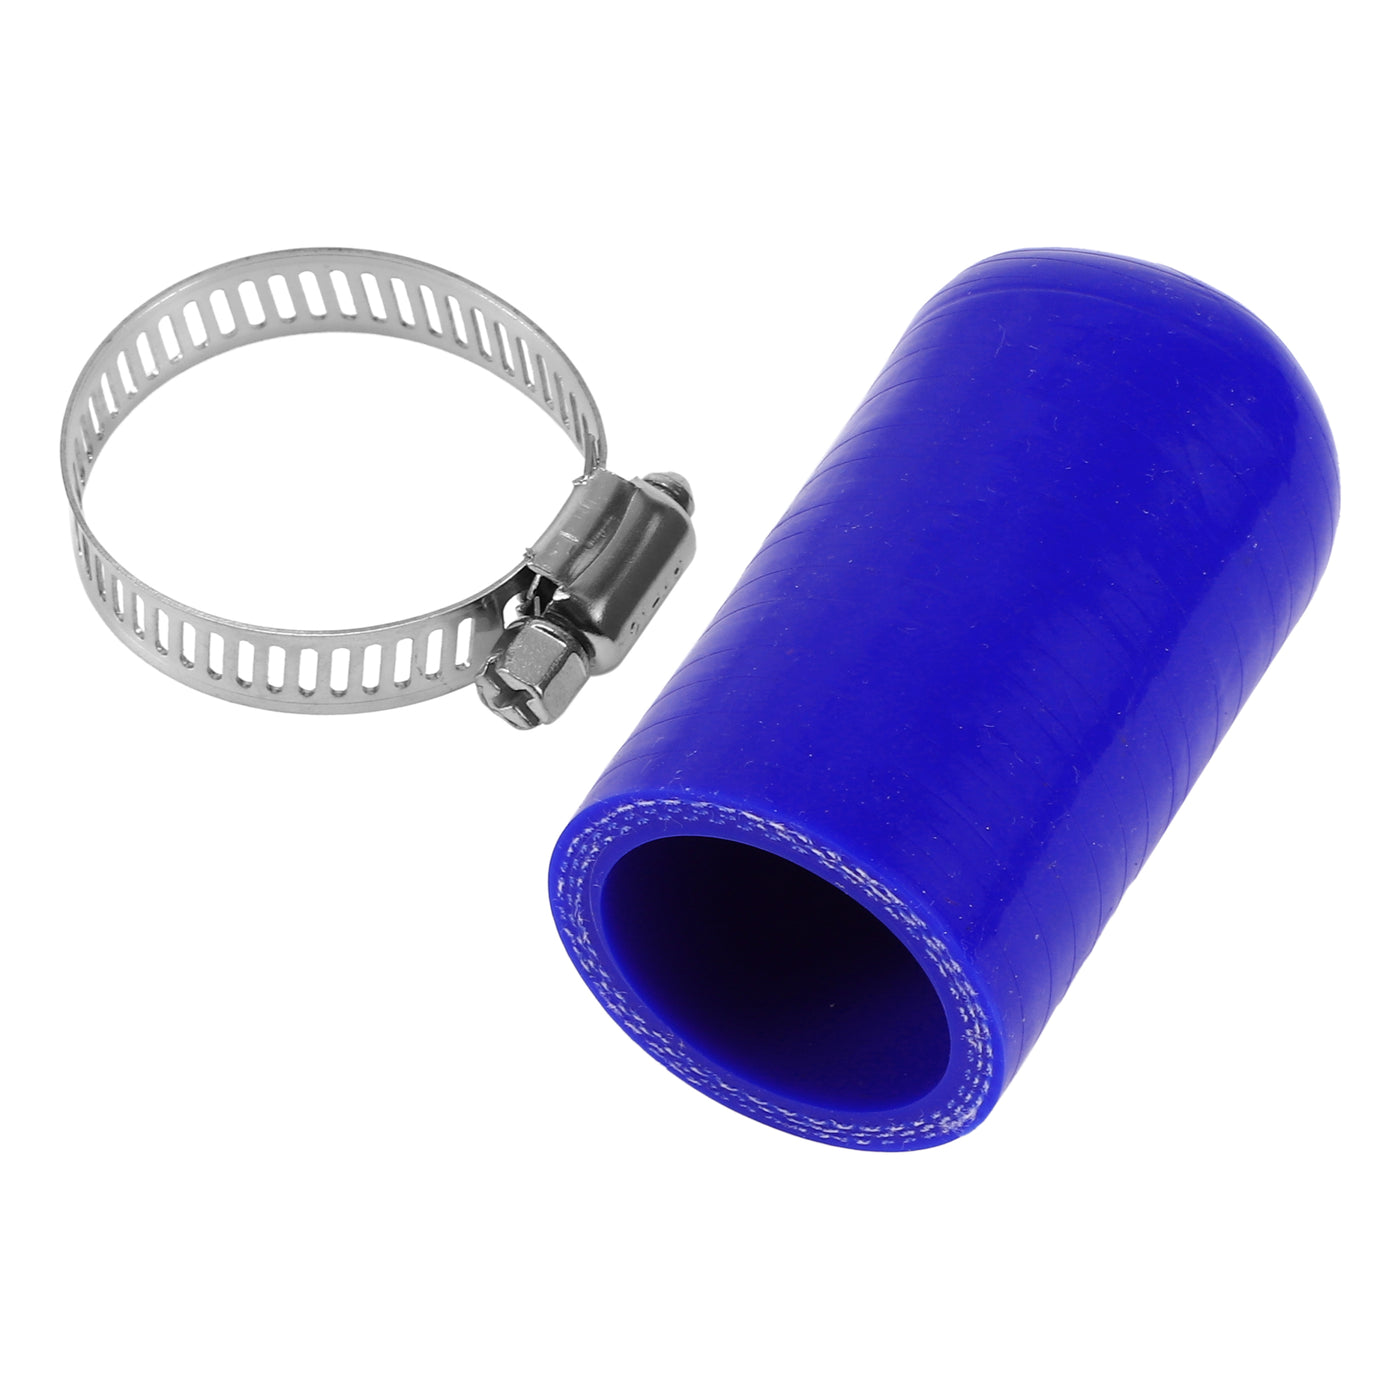 X AUTOHAUX 1 Pcs 60mm Length 30mm/1.18" ID Blue Car Silicone Rubber Hose End Cap with Clamp Silicone Reinforced Blanking Cap for Bypass Tube Universal